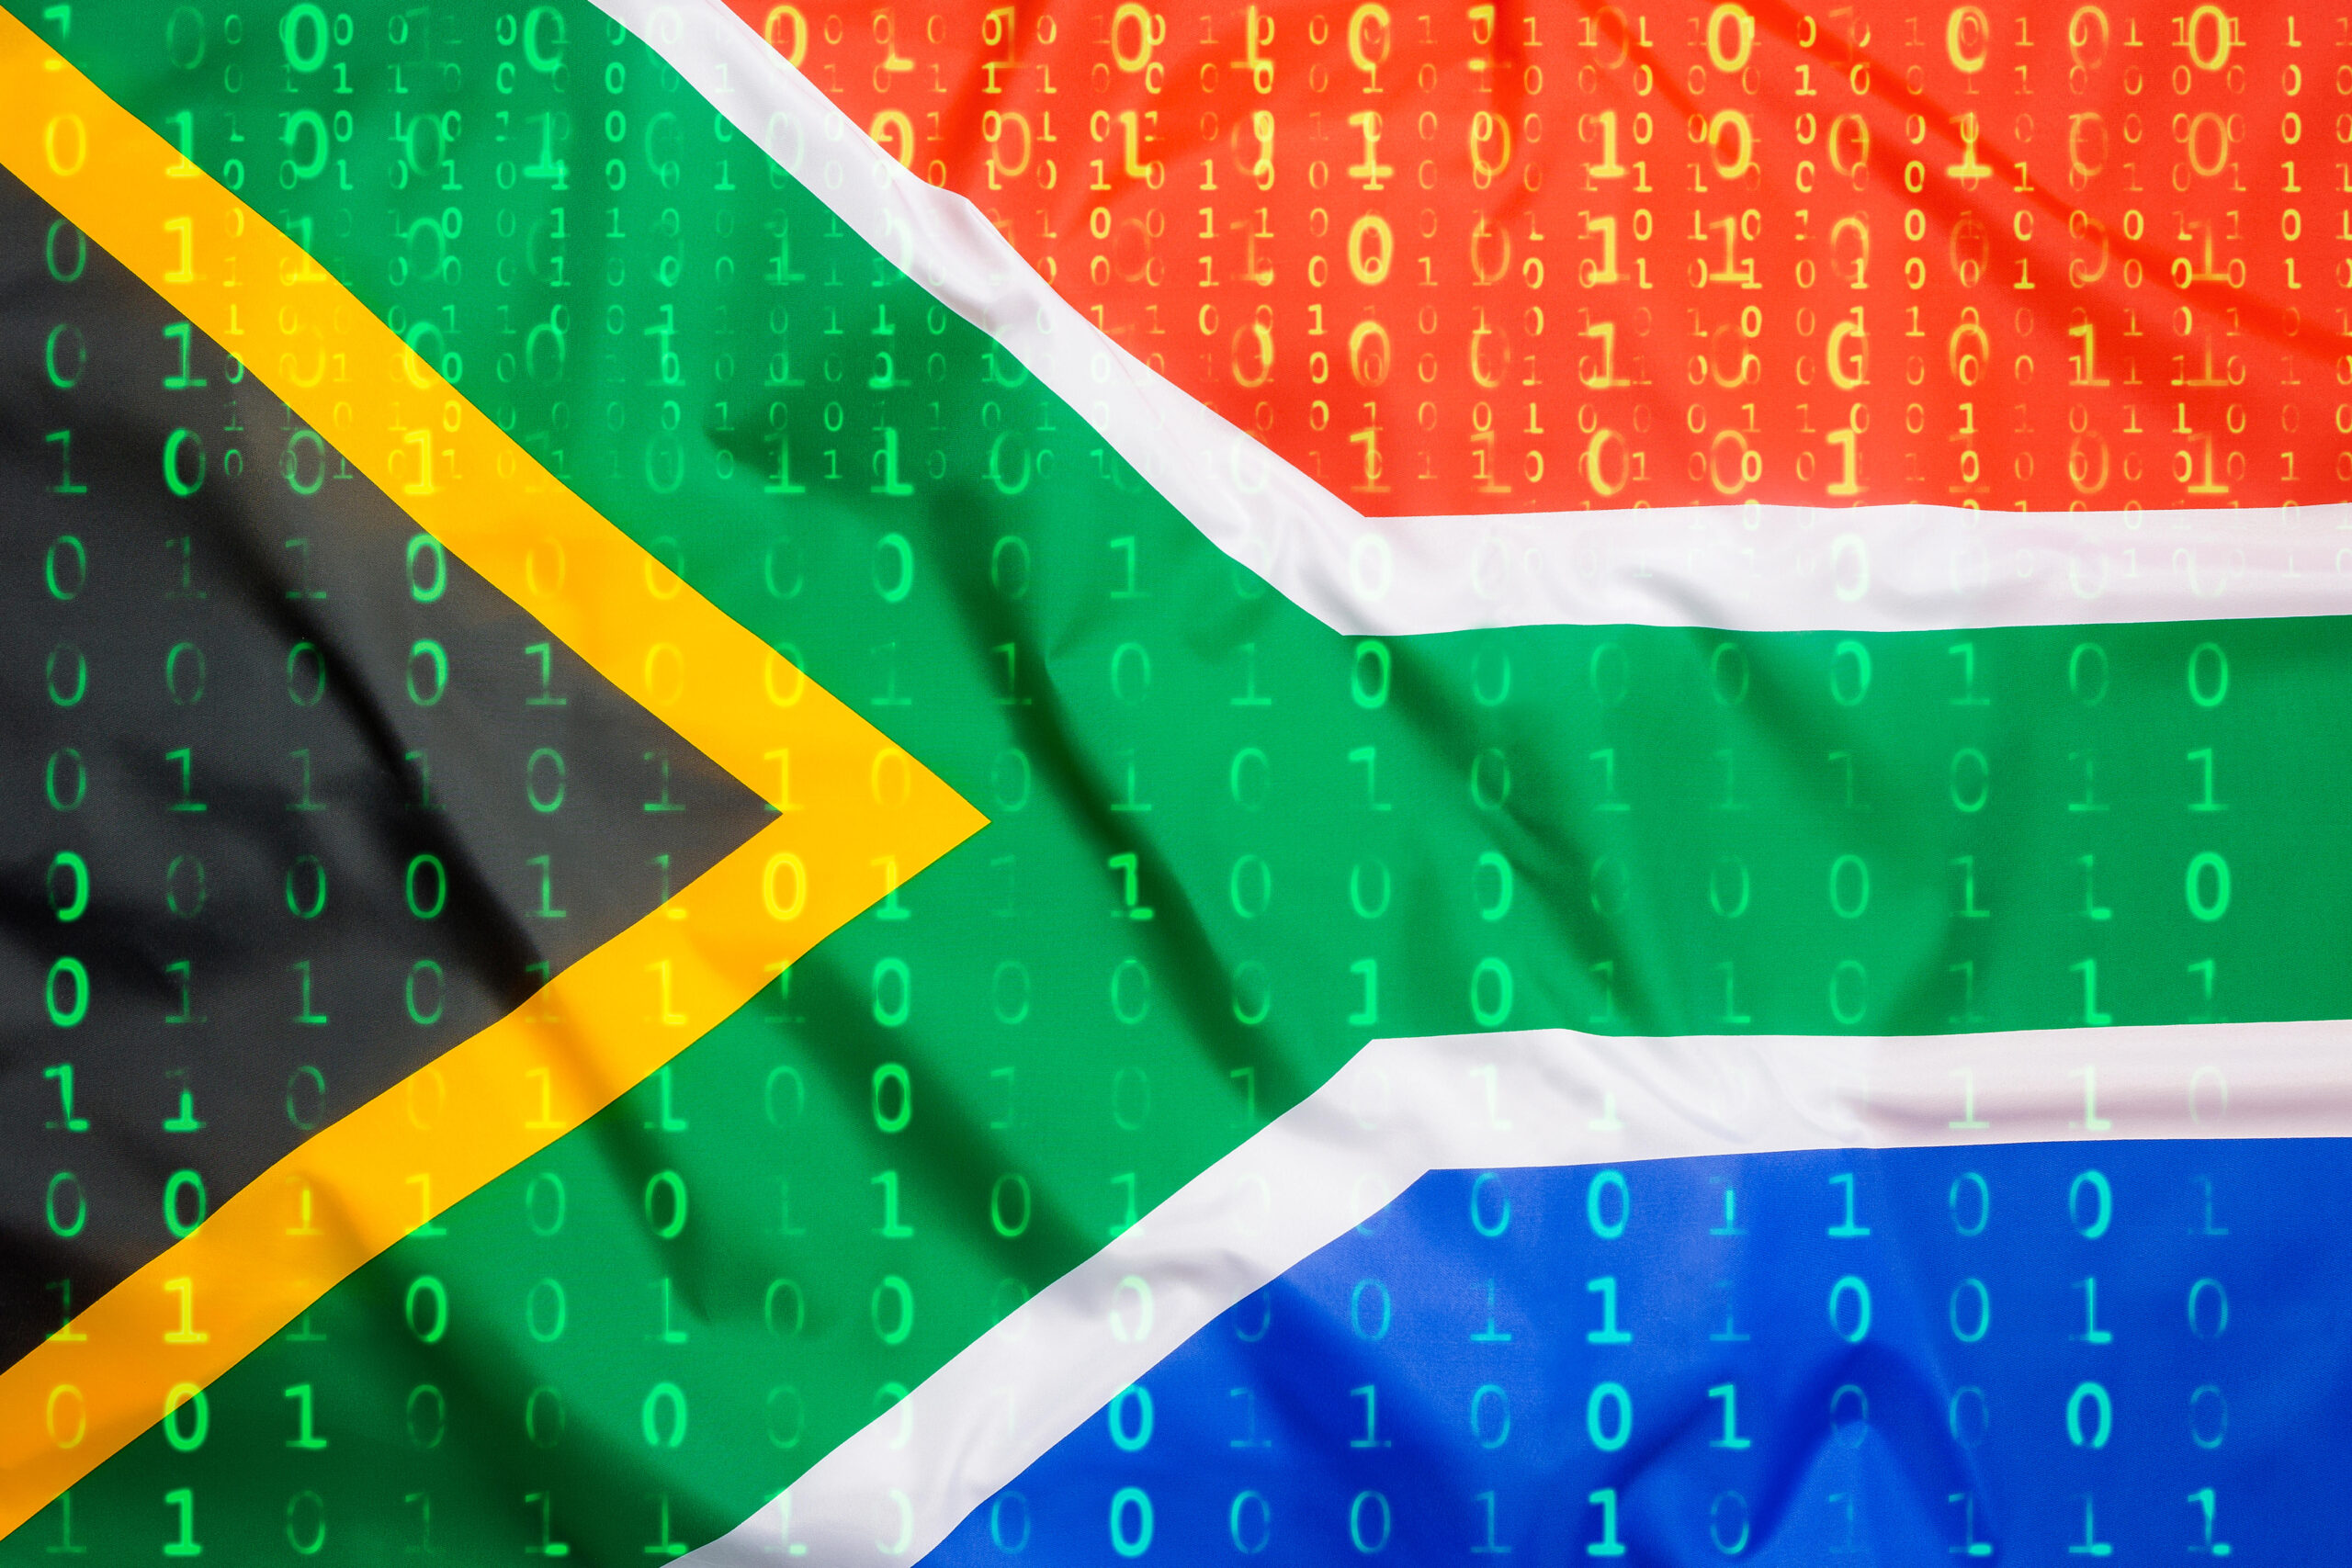 South African Department of Defence Denies Stolen Data Claims – Source: www.darkreading.com